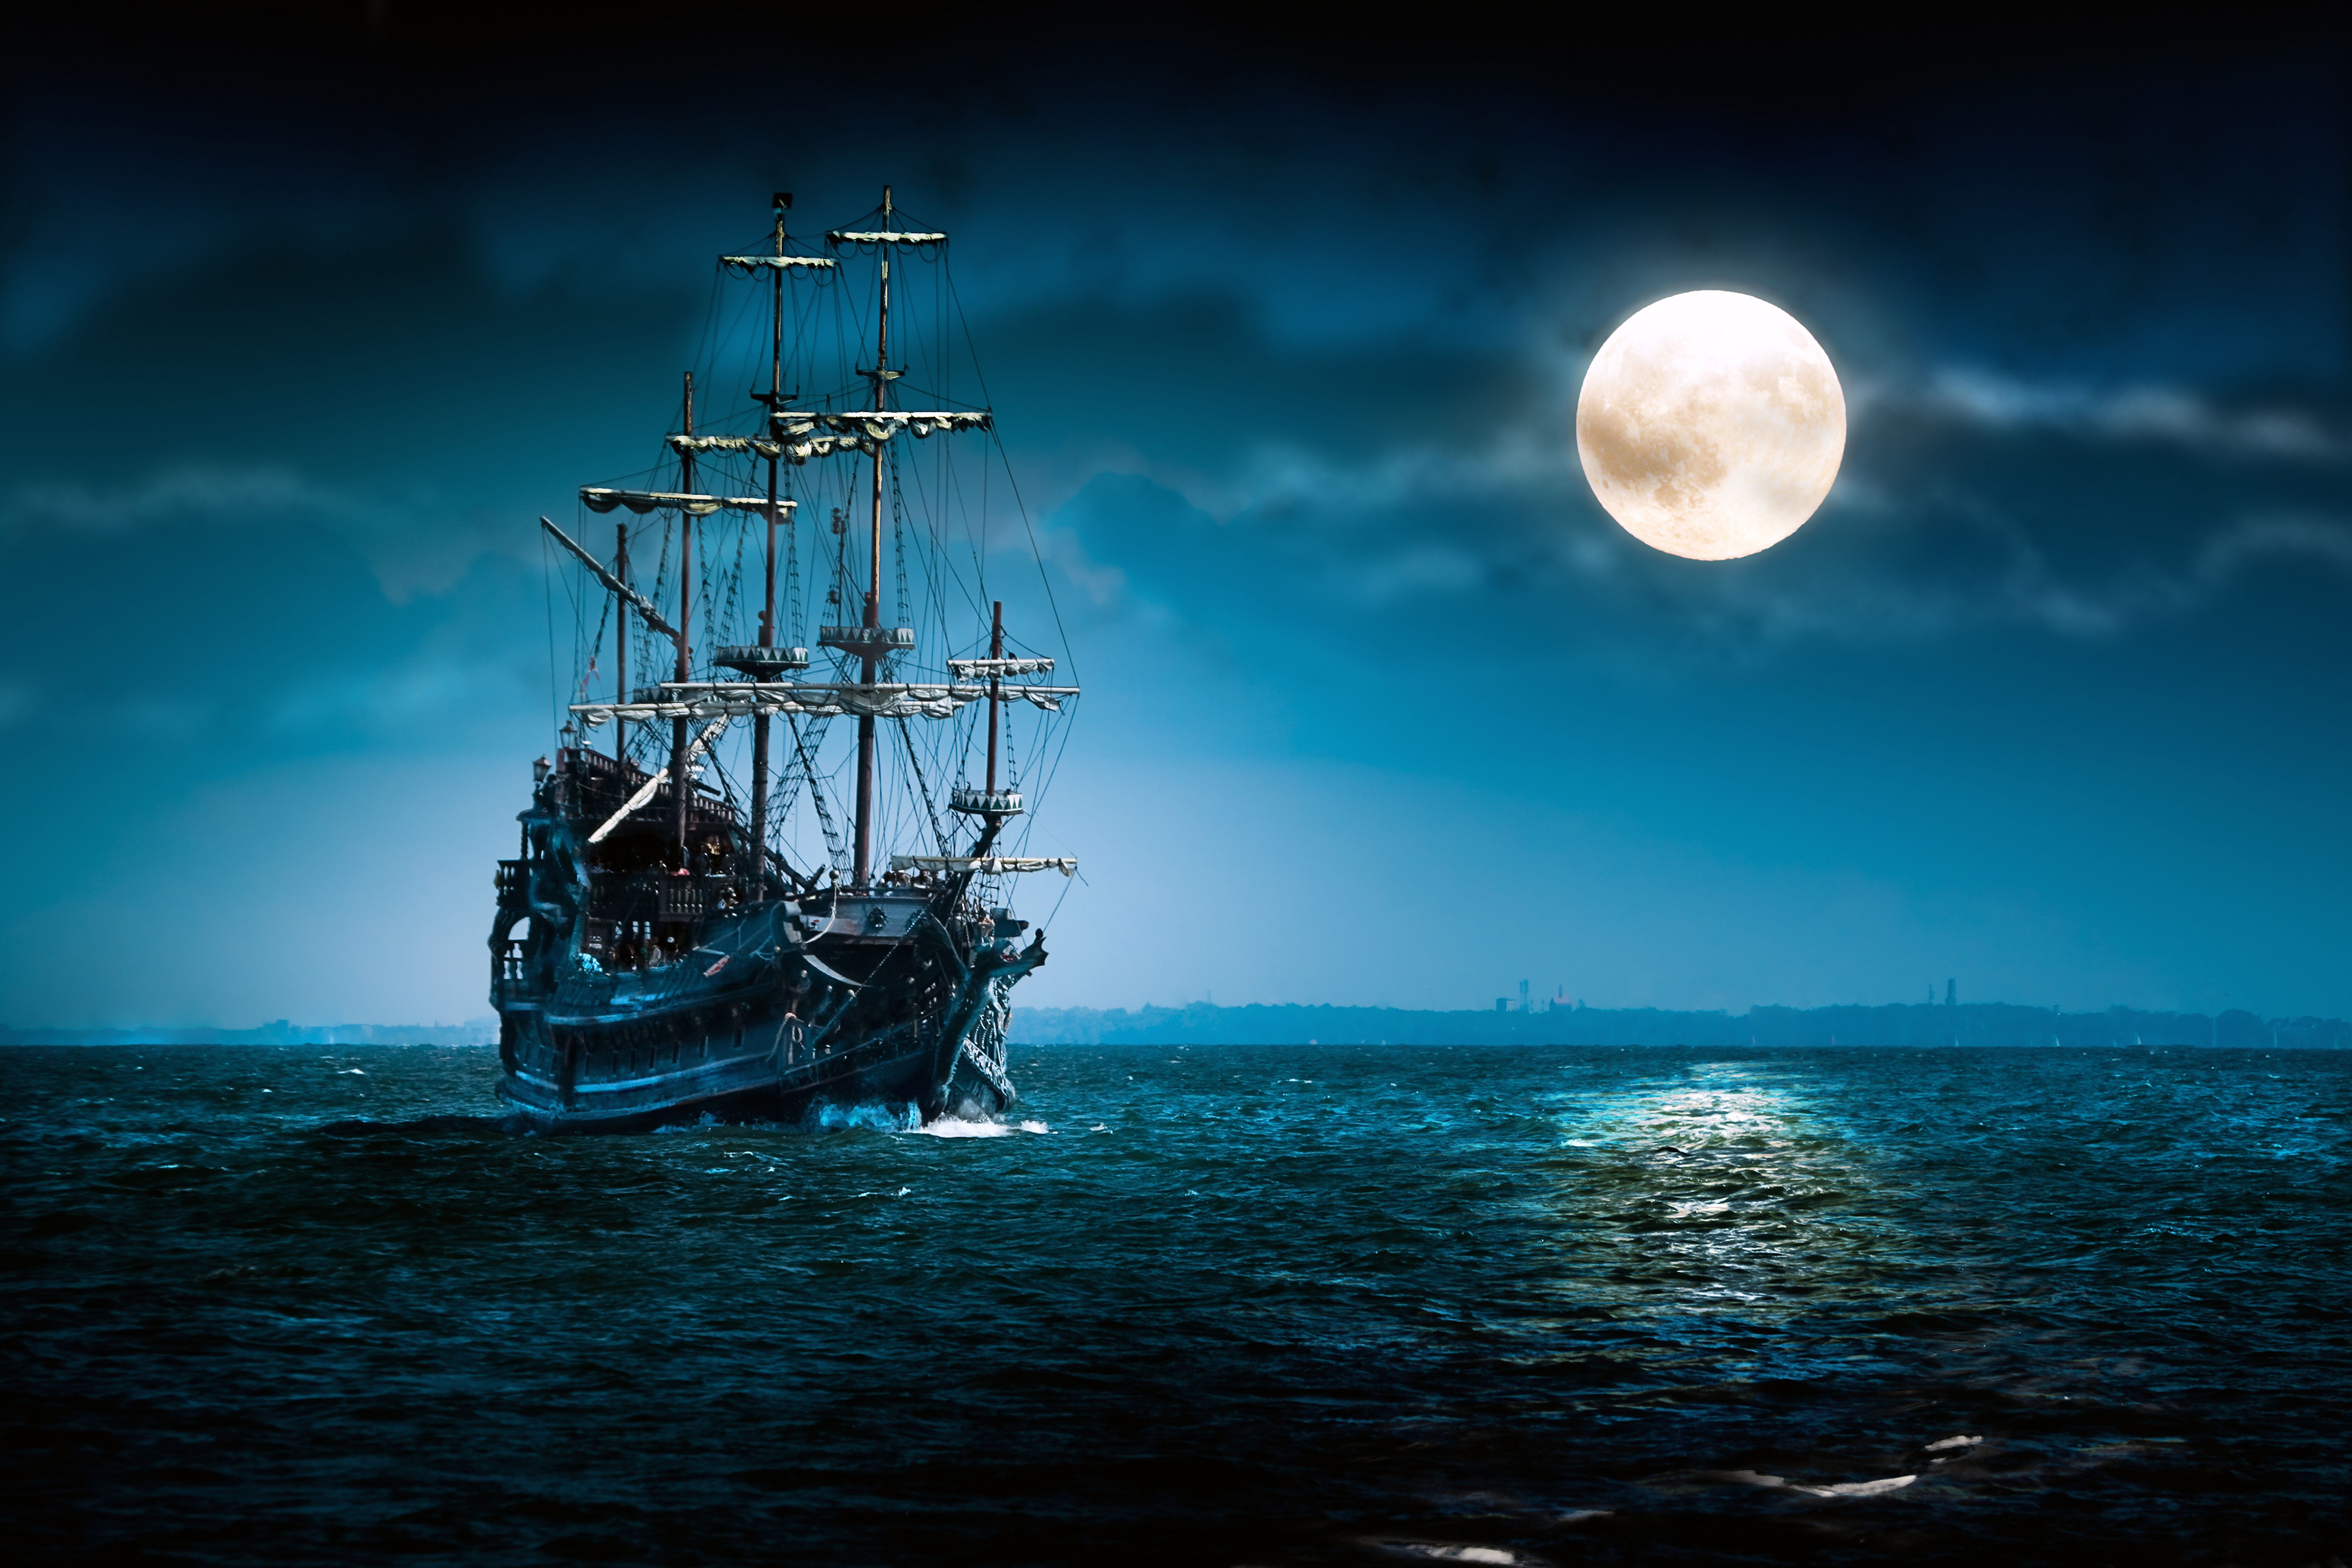 Ships at Night Wallpapers   Top Free Ships at Night Backgrounds